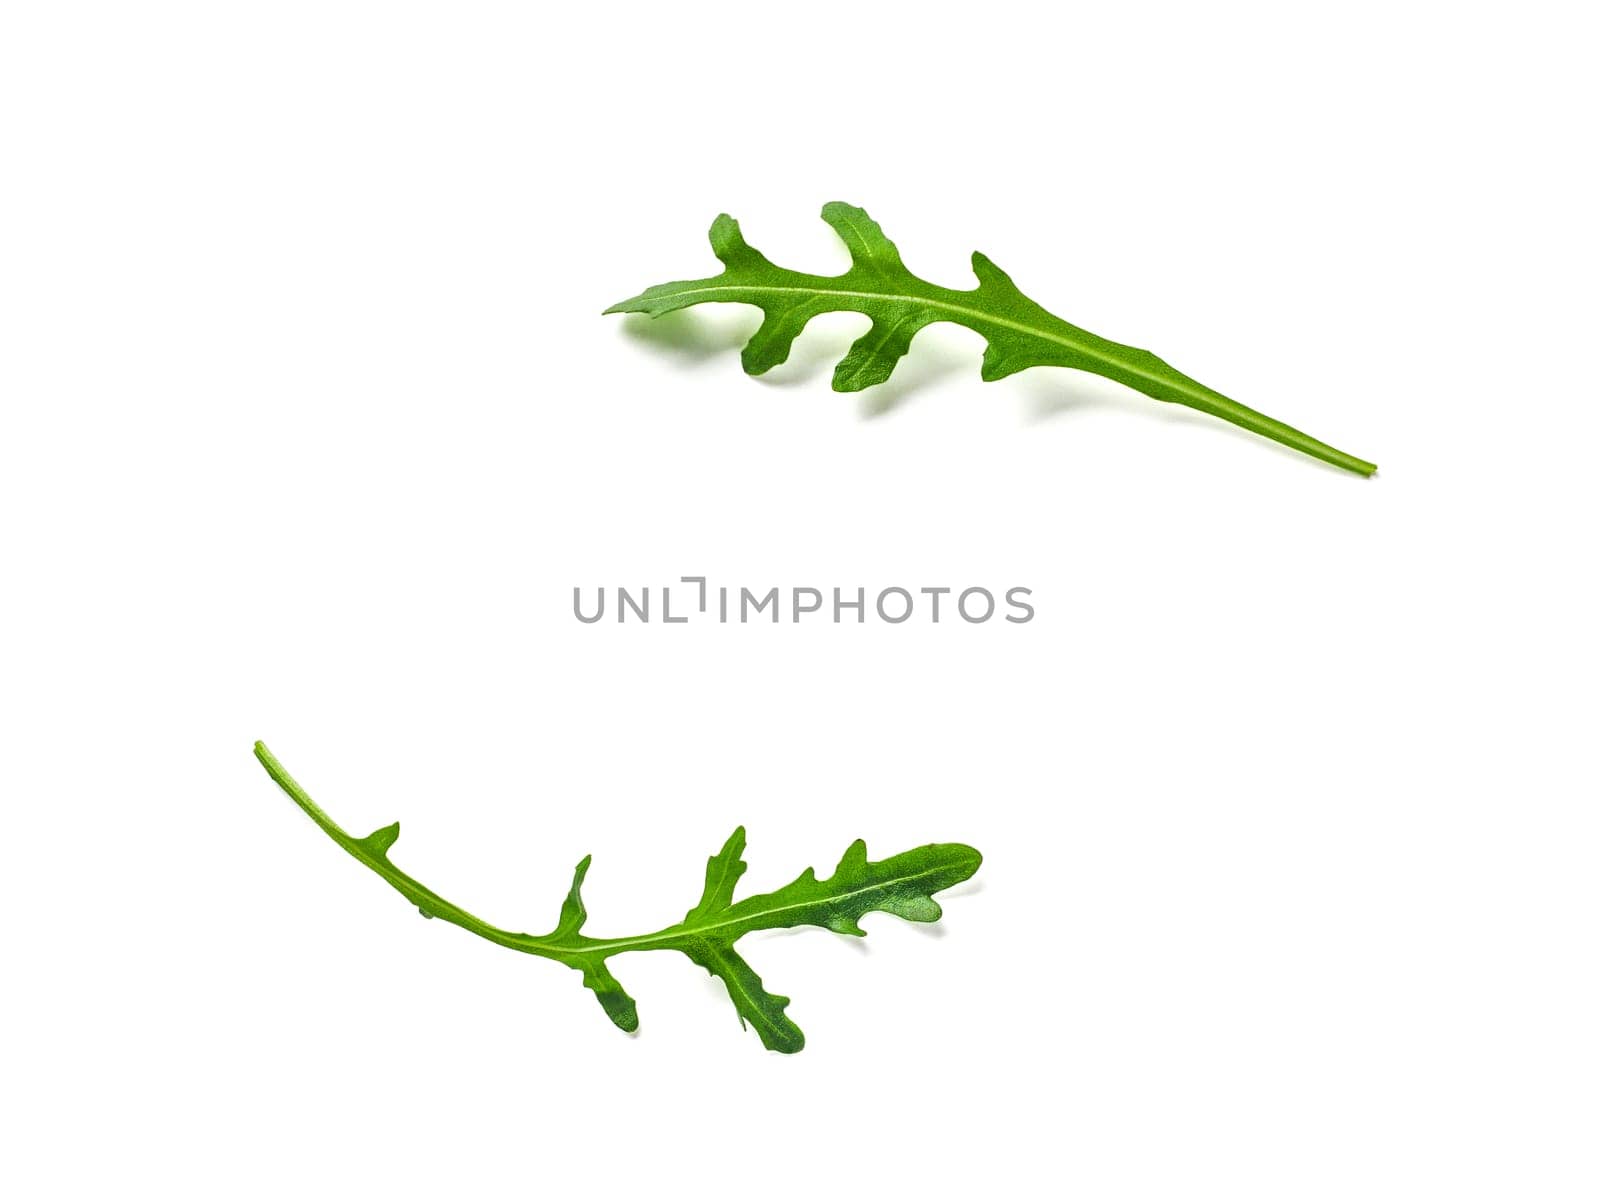 Creative layout made with arugula leaves. Two arugula or rucola leaves with copy space for design or text in center. Isolated on white with clipping path. Top view or flat lay.